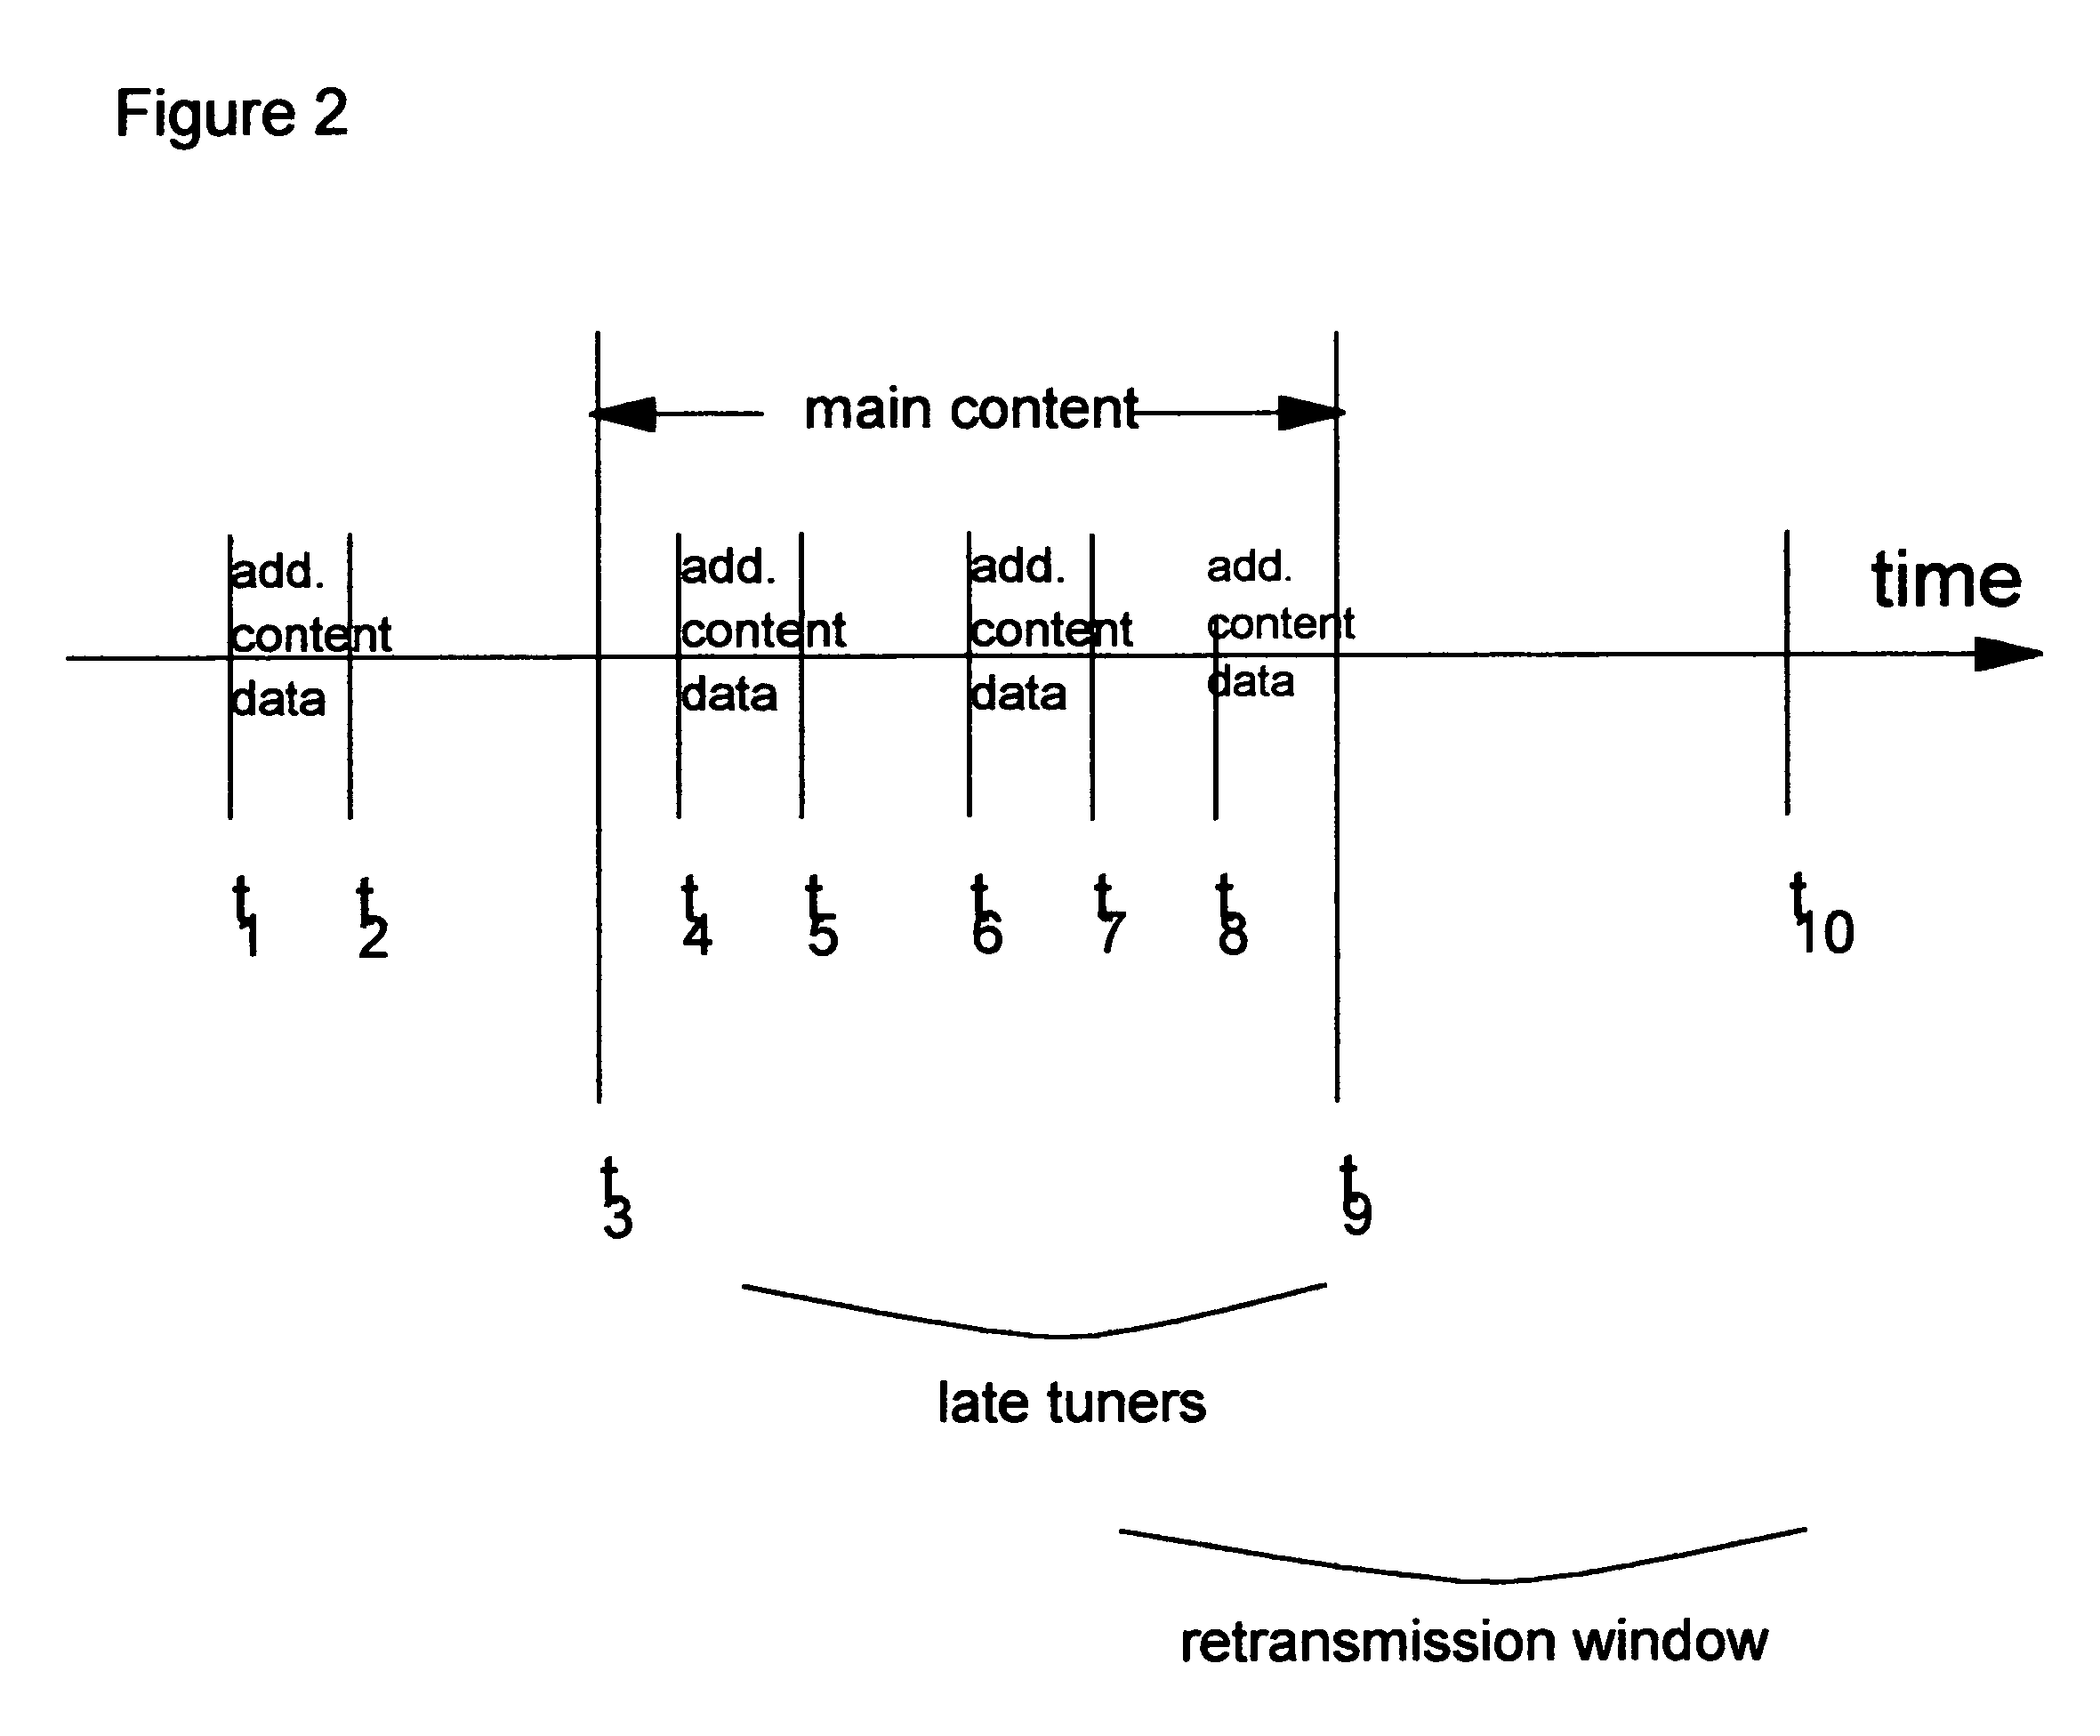 System and method for the coordination of short-term cyclic data and ephemeral content in a broadcast stream